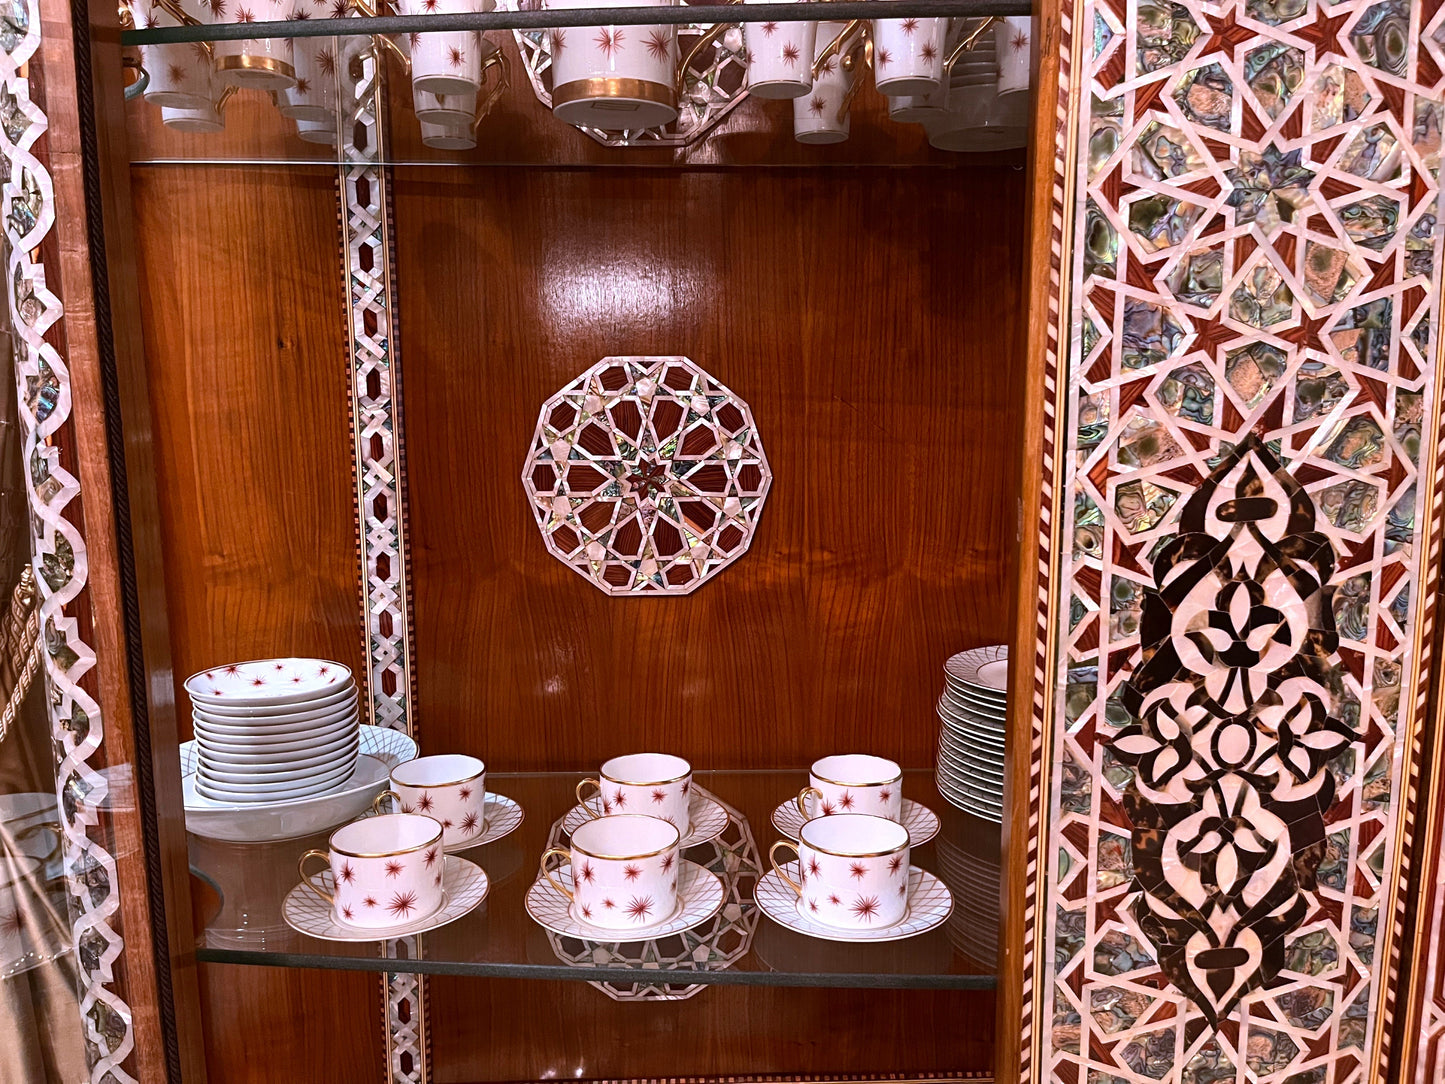 The Sultans Cabinet